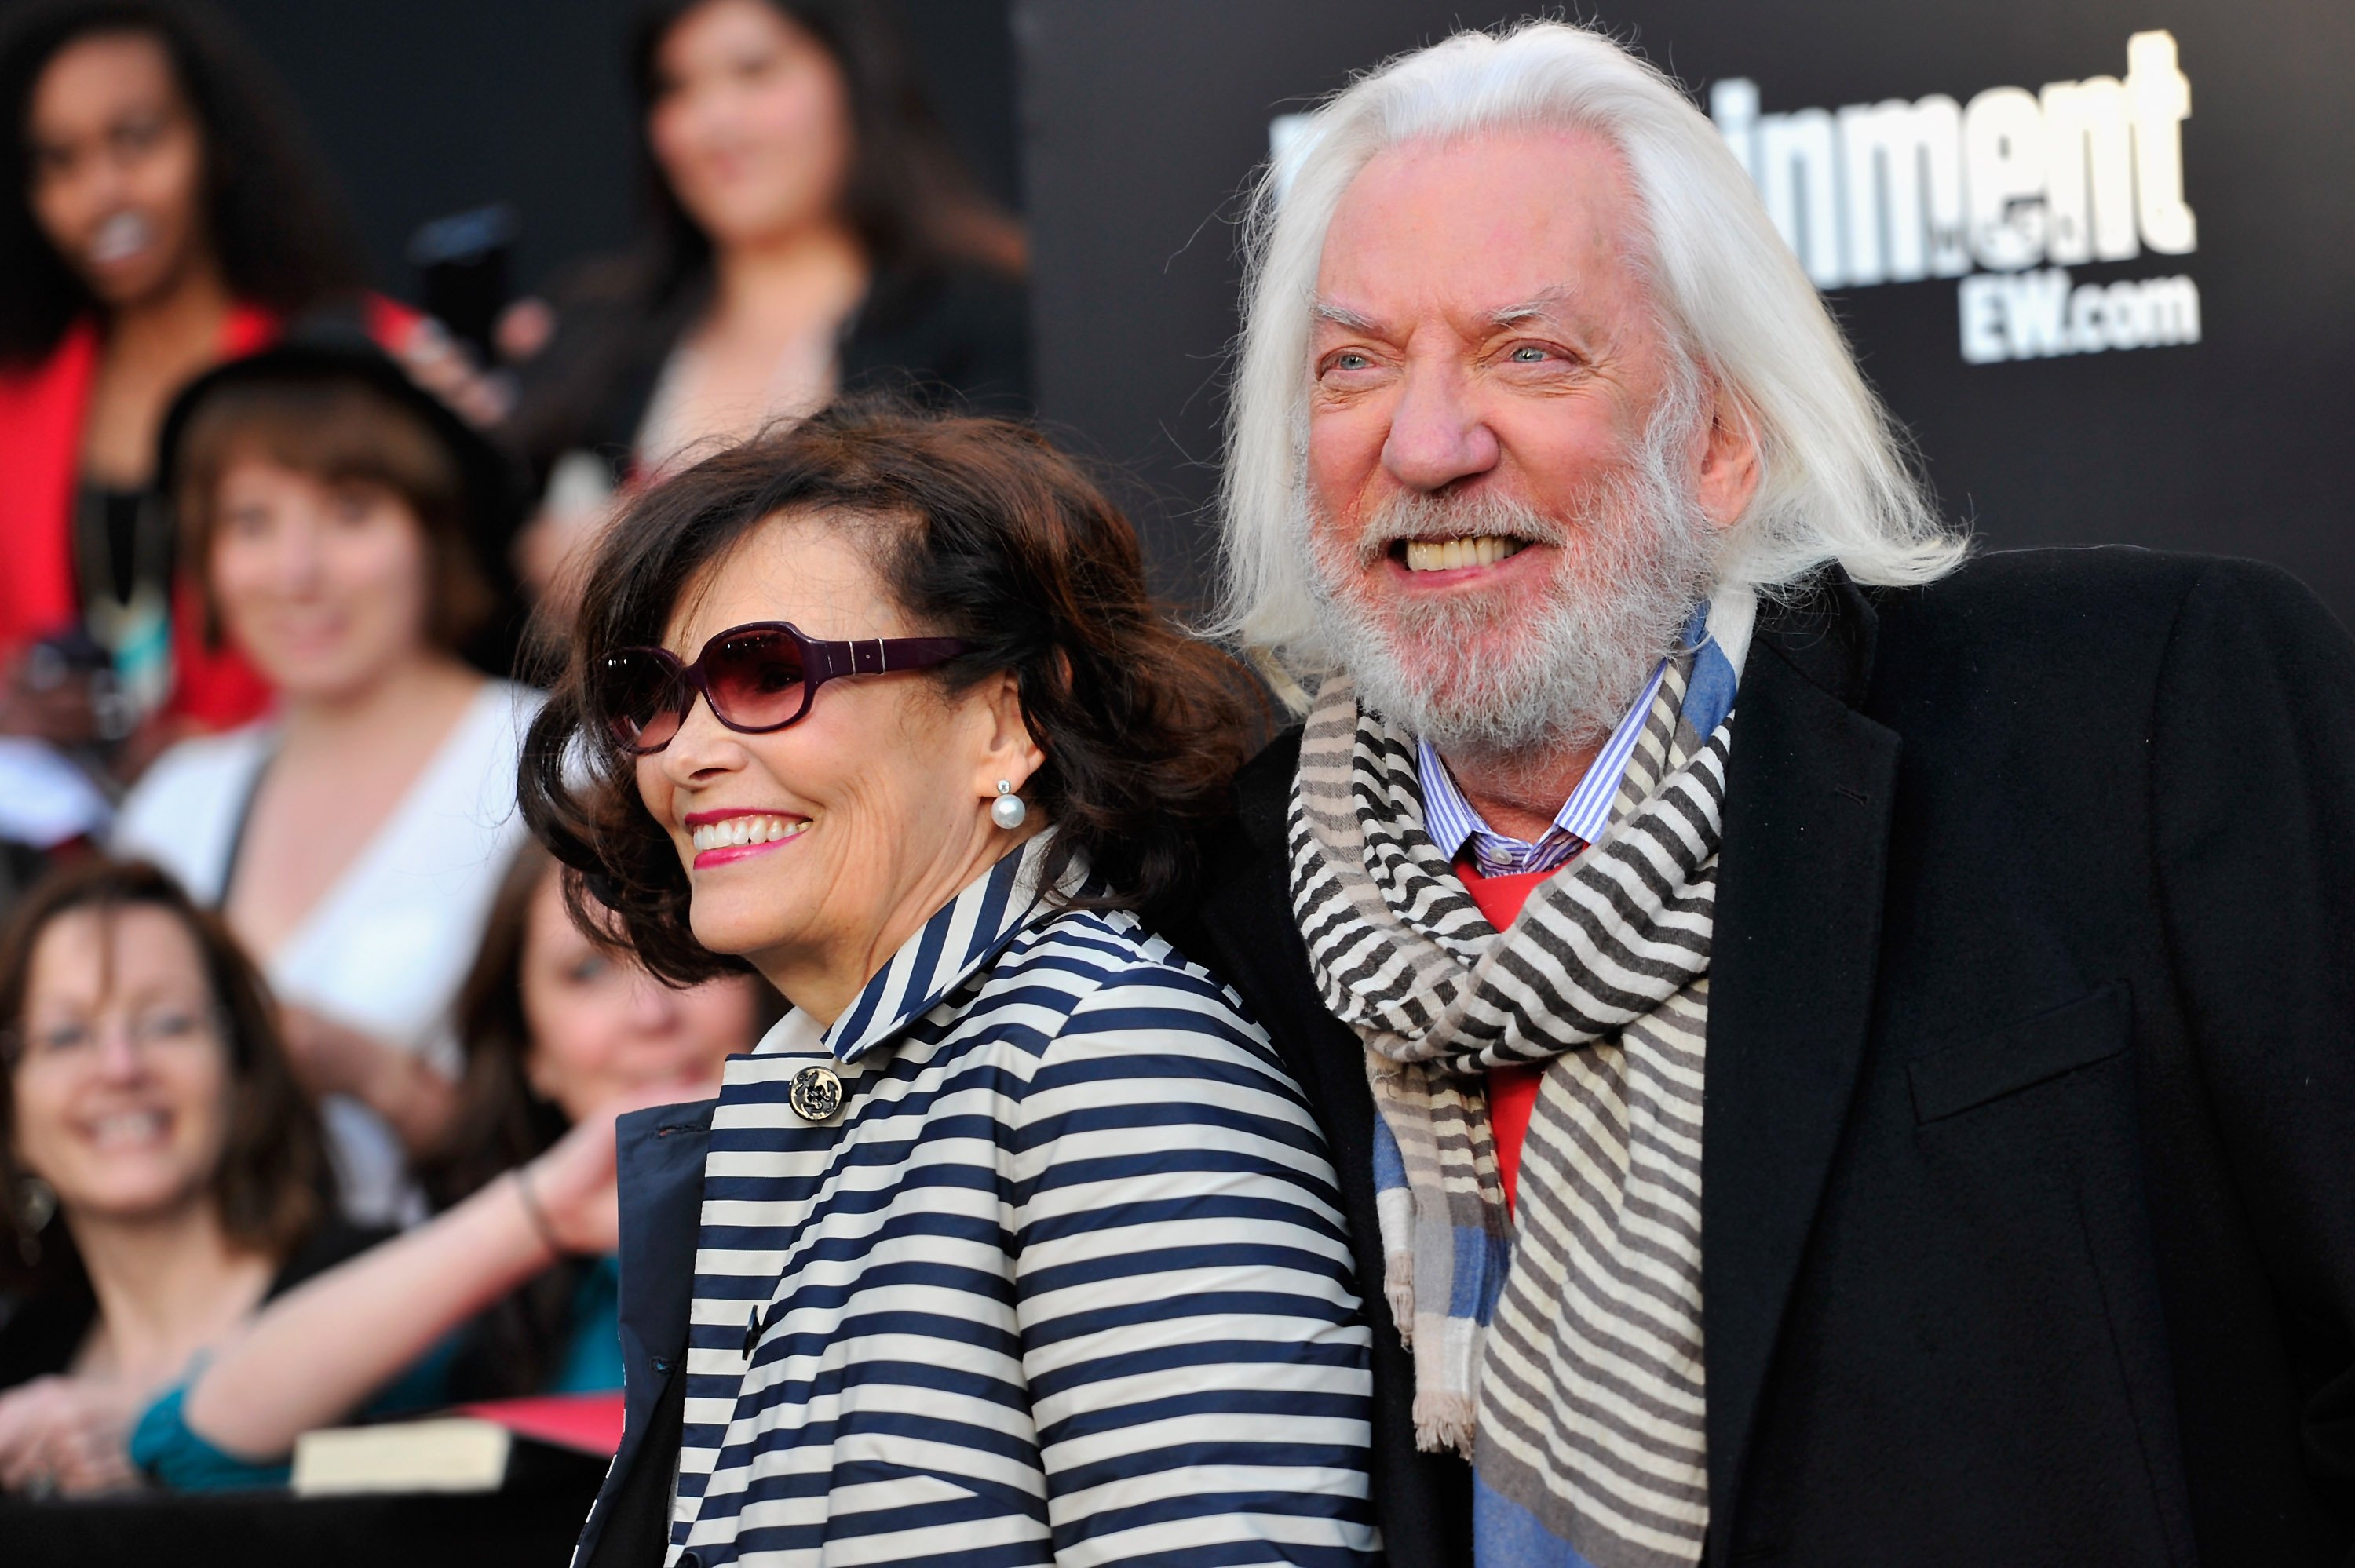  Francine Racette and actor Donald Sutherland arrive to the premiere of Lionsgate's "The Hunger Games" at Nokia Theatre L.A. Live on March 12, 2012 in Los Angeles, California | Source: Getty Images